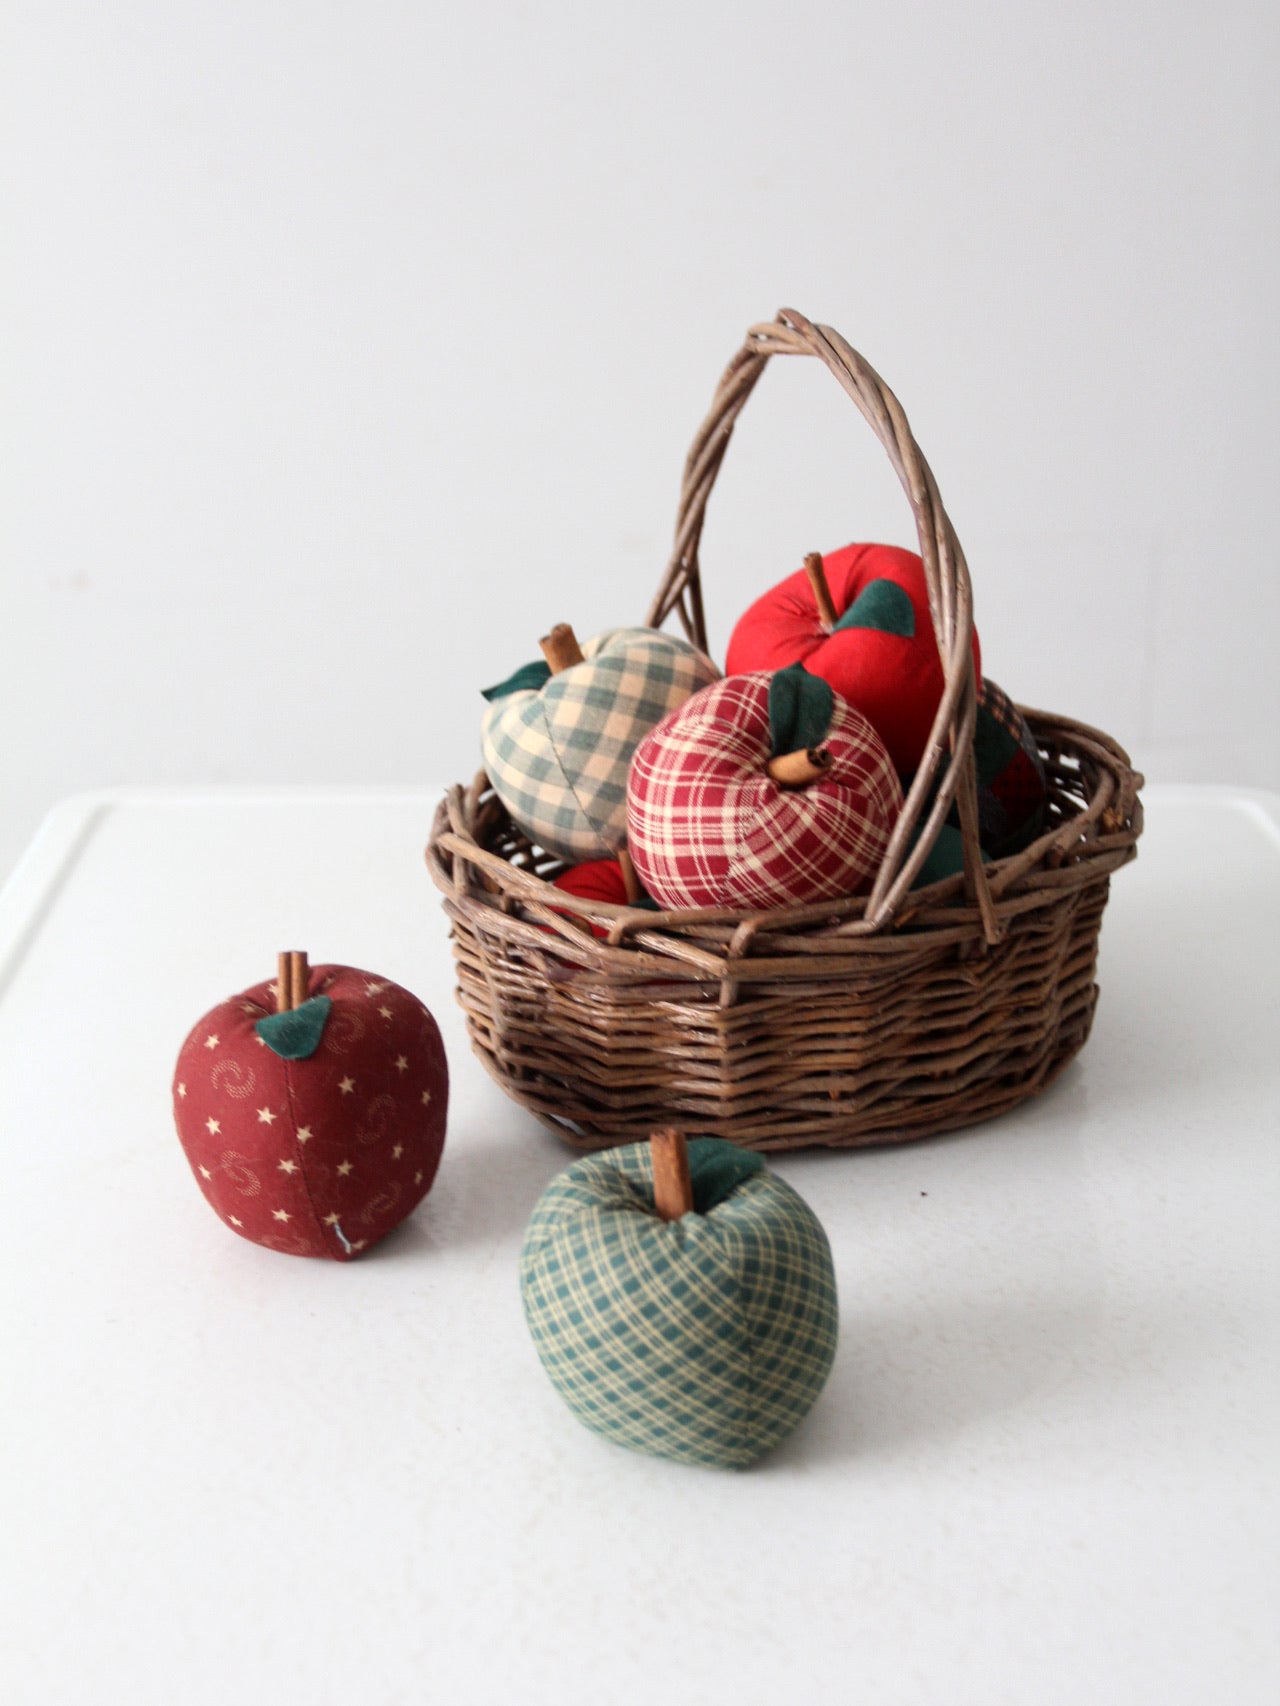 vintage hand-made fabric apple ornaments set of 9